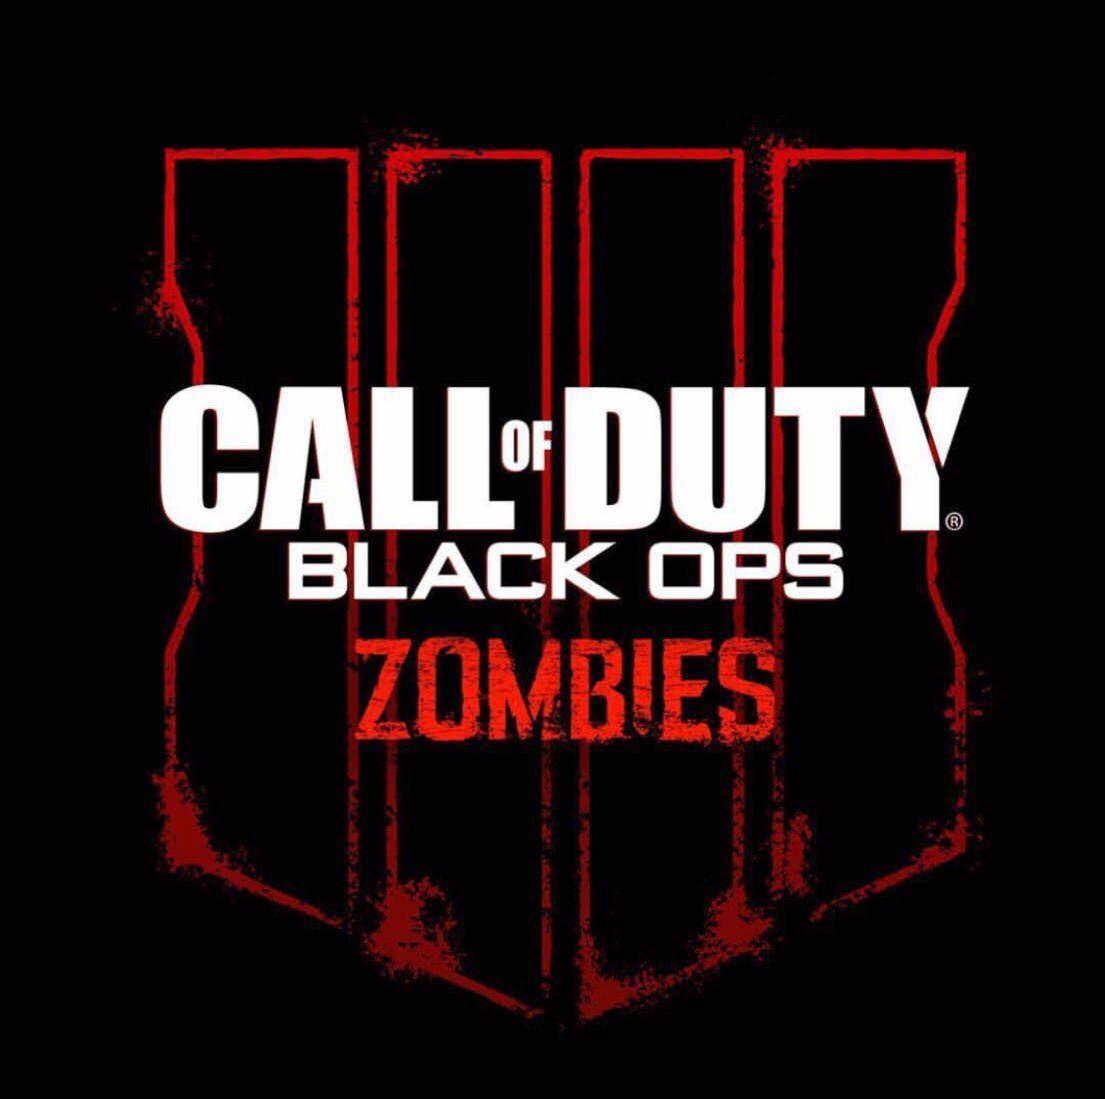 New Black Ops 4 Zombies phone wallpaper